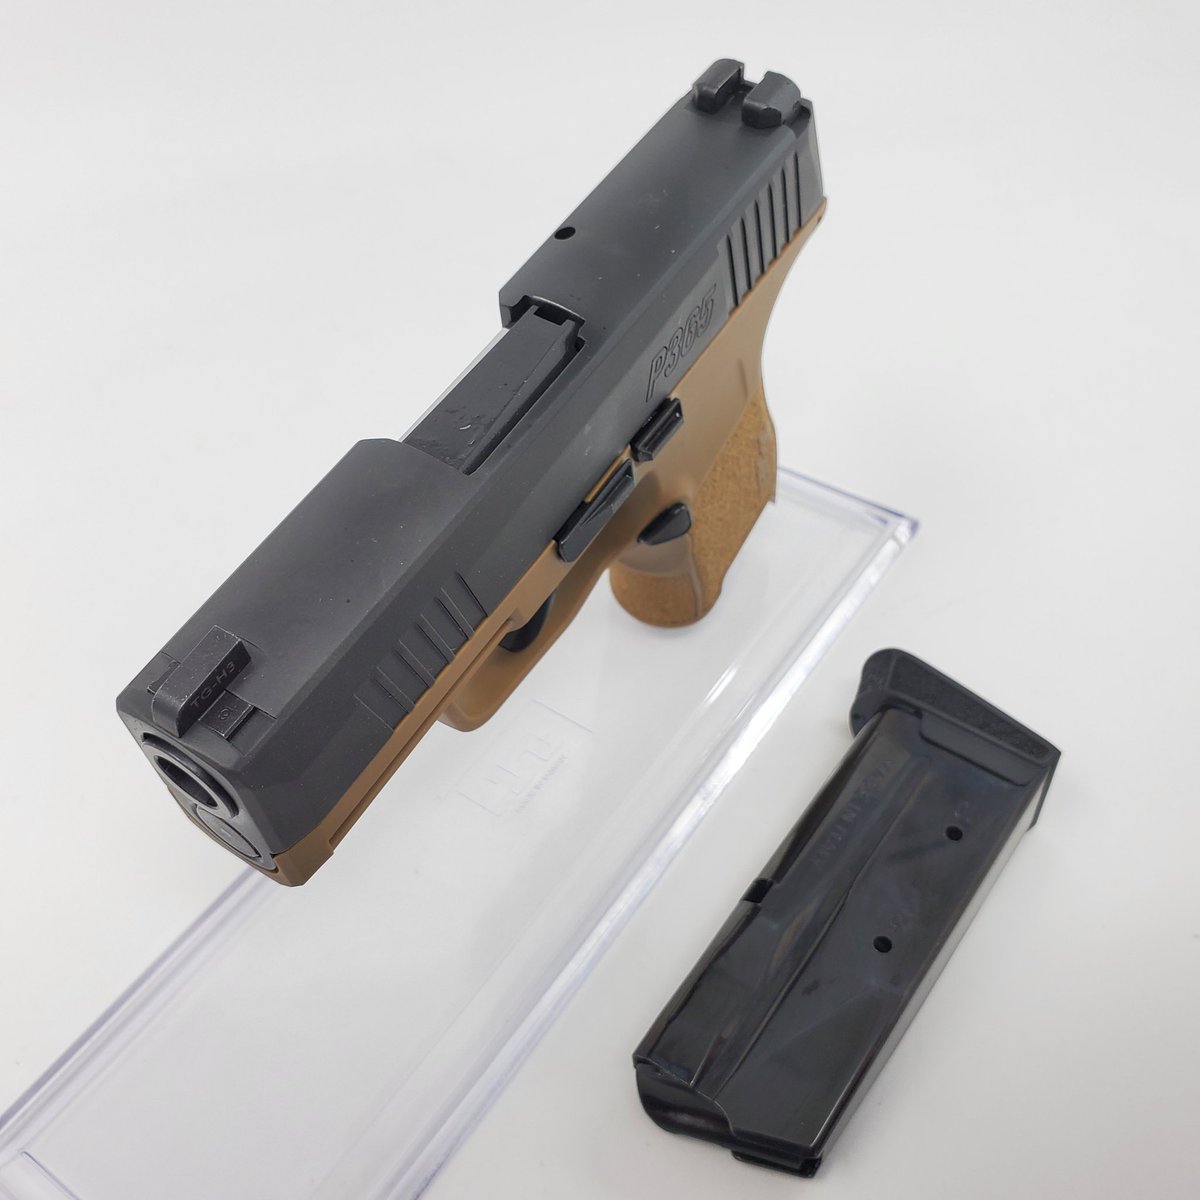 [9mm] P365 Pistol in FDE, by Sig Sauer!
•
Condition: Factory New
Type: Pistol
Caliber: 9mm
Capacity: 10+1
#sigsauer #sigsauerp365 #p365 #9mm #9mmpistol #factorynewpistol #pistol #firearms #pewpewpew